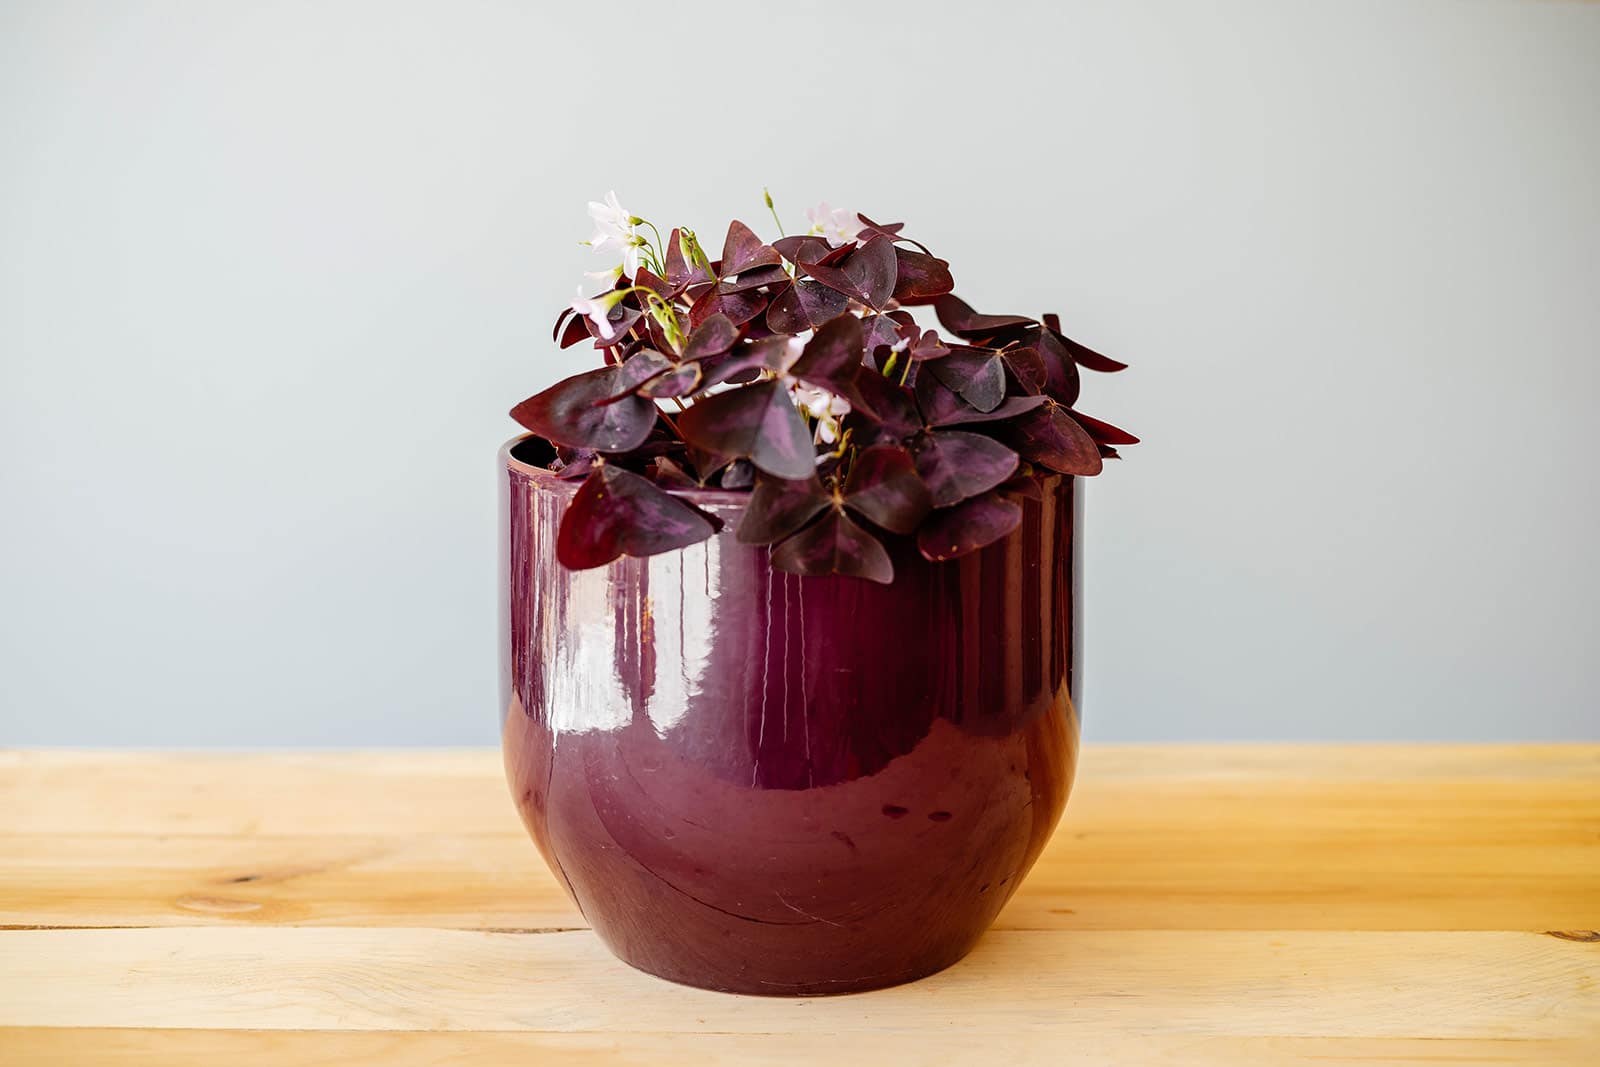 Small Oxalis triangularis plant in a purple ceramic pot on a wooden surface